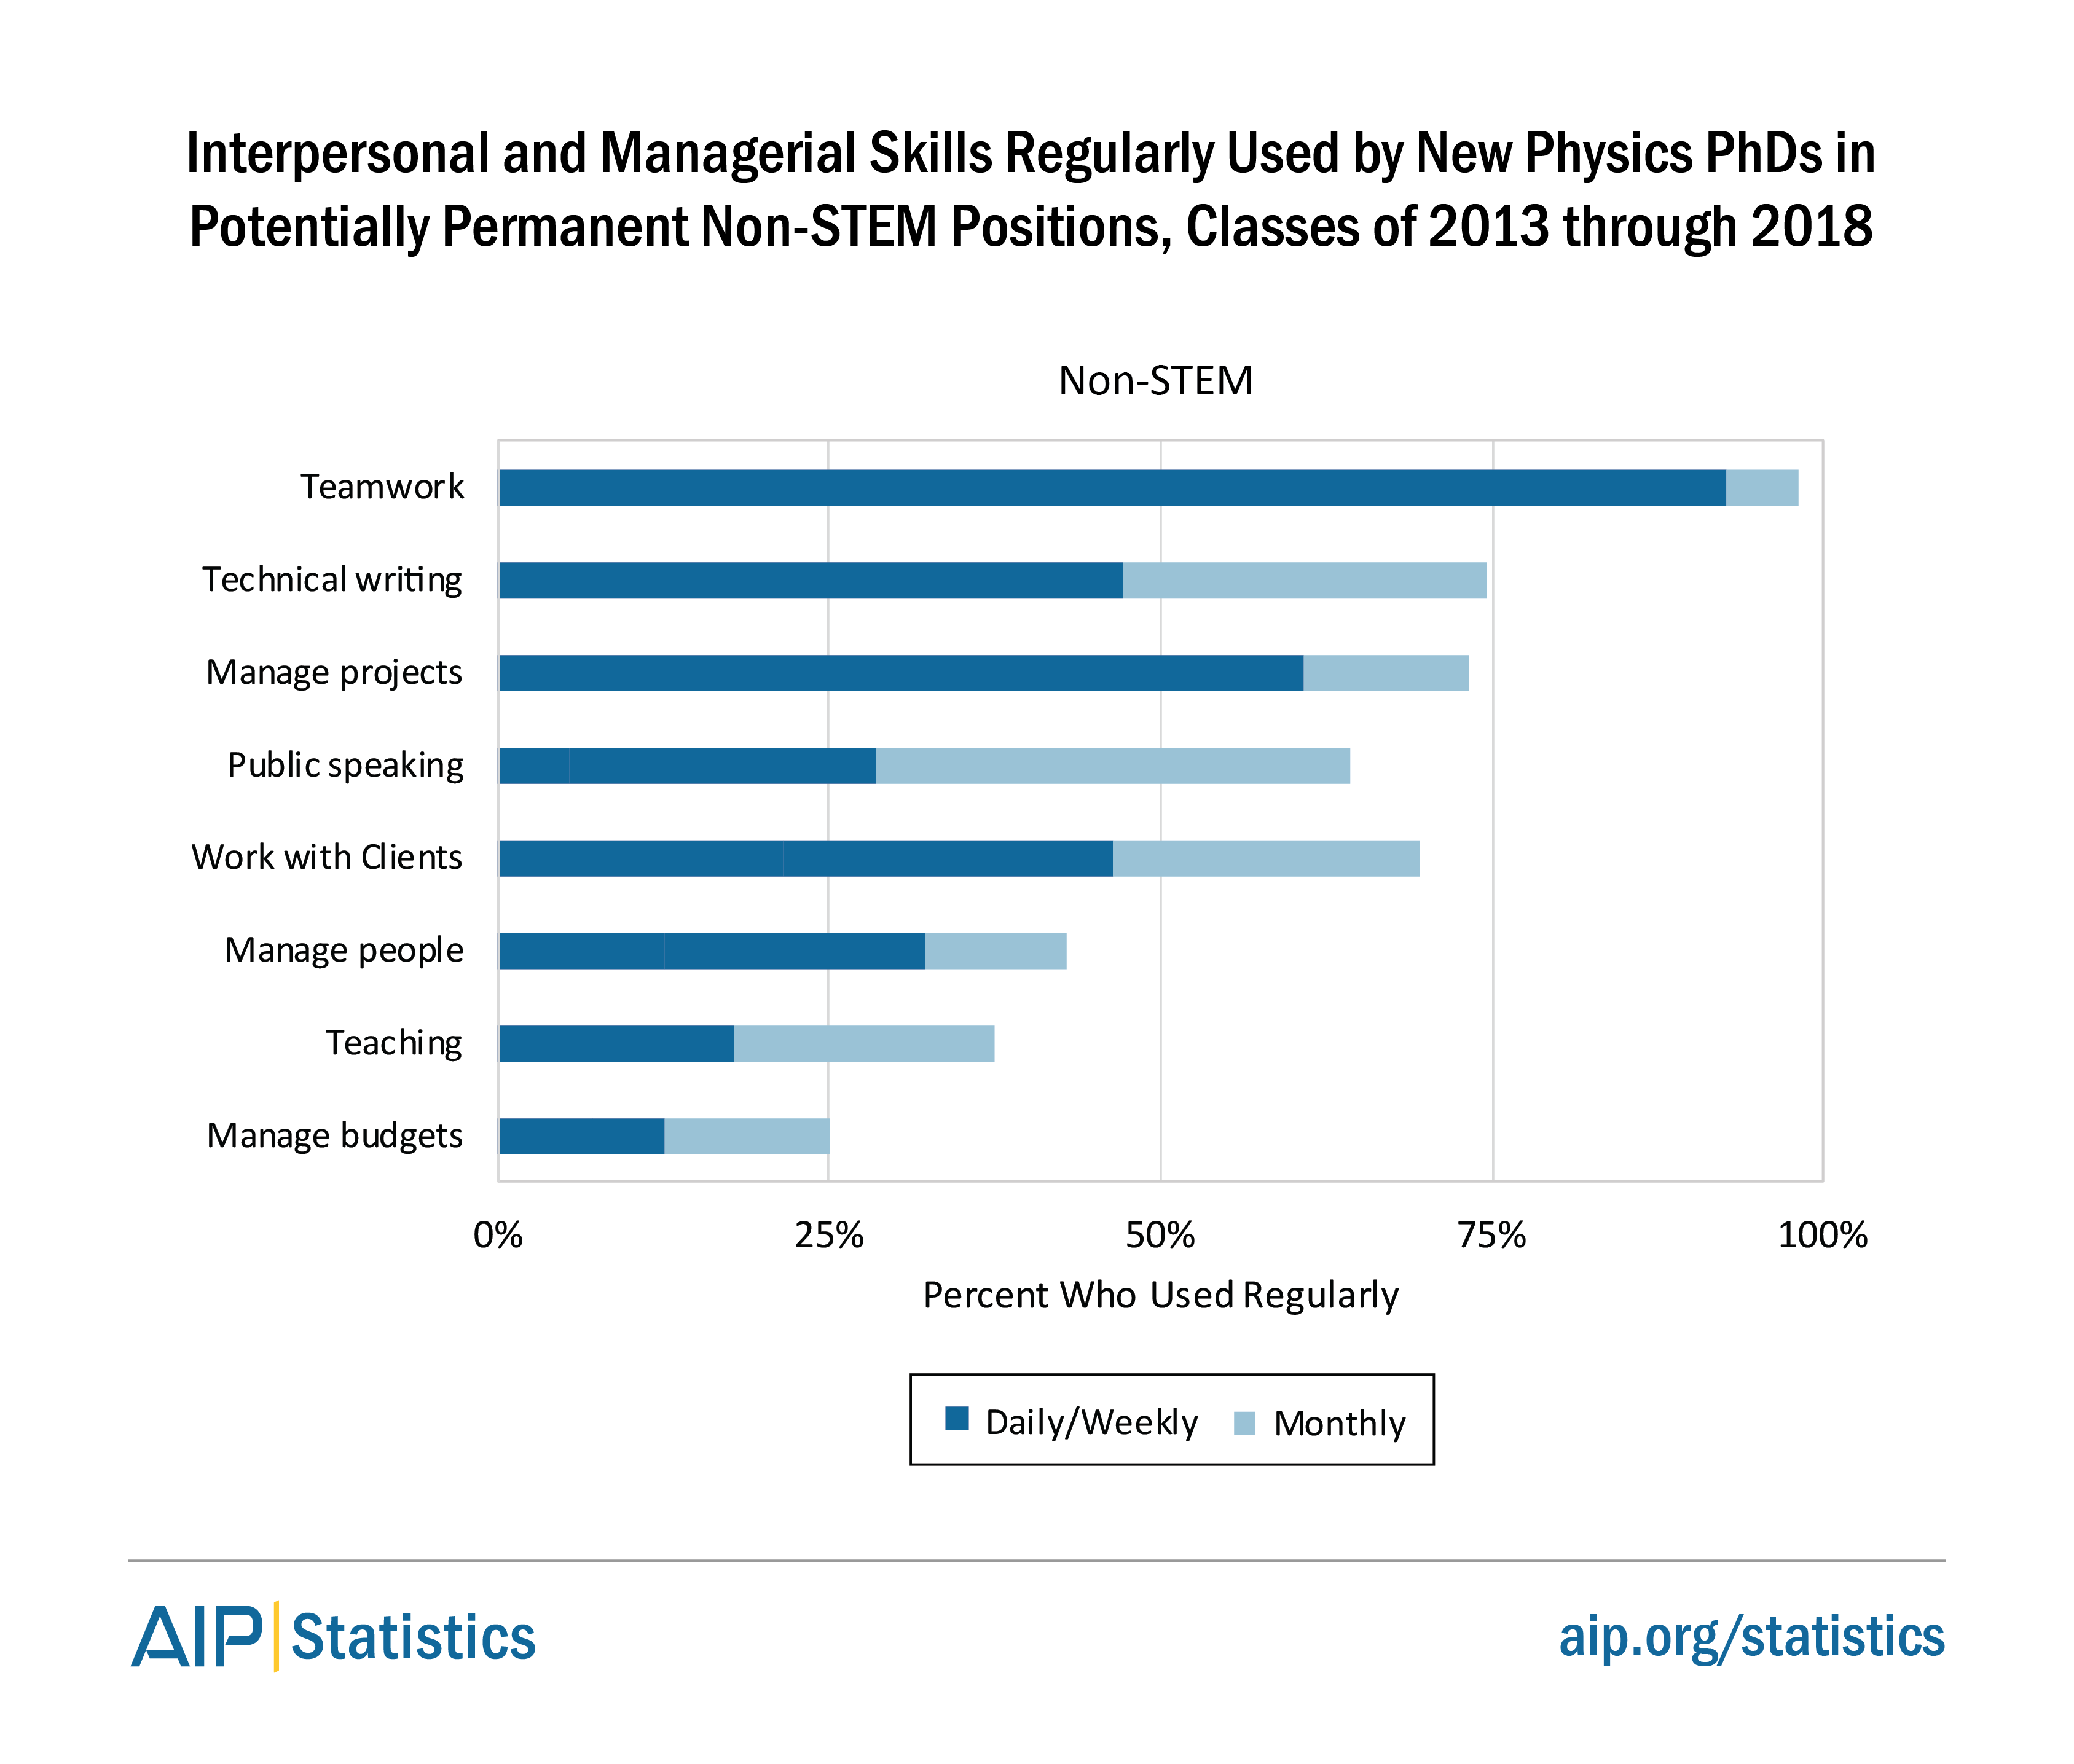 Interpersonal and Managerial Skills Used by Physics PhDs in Non-STEM Positions